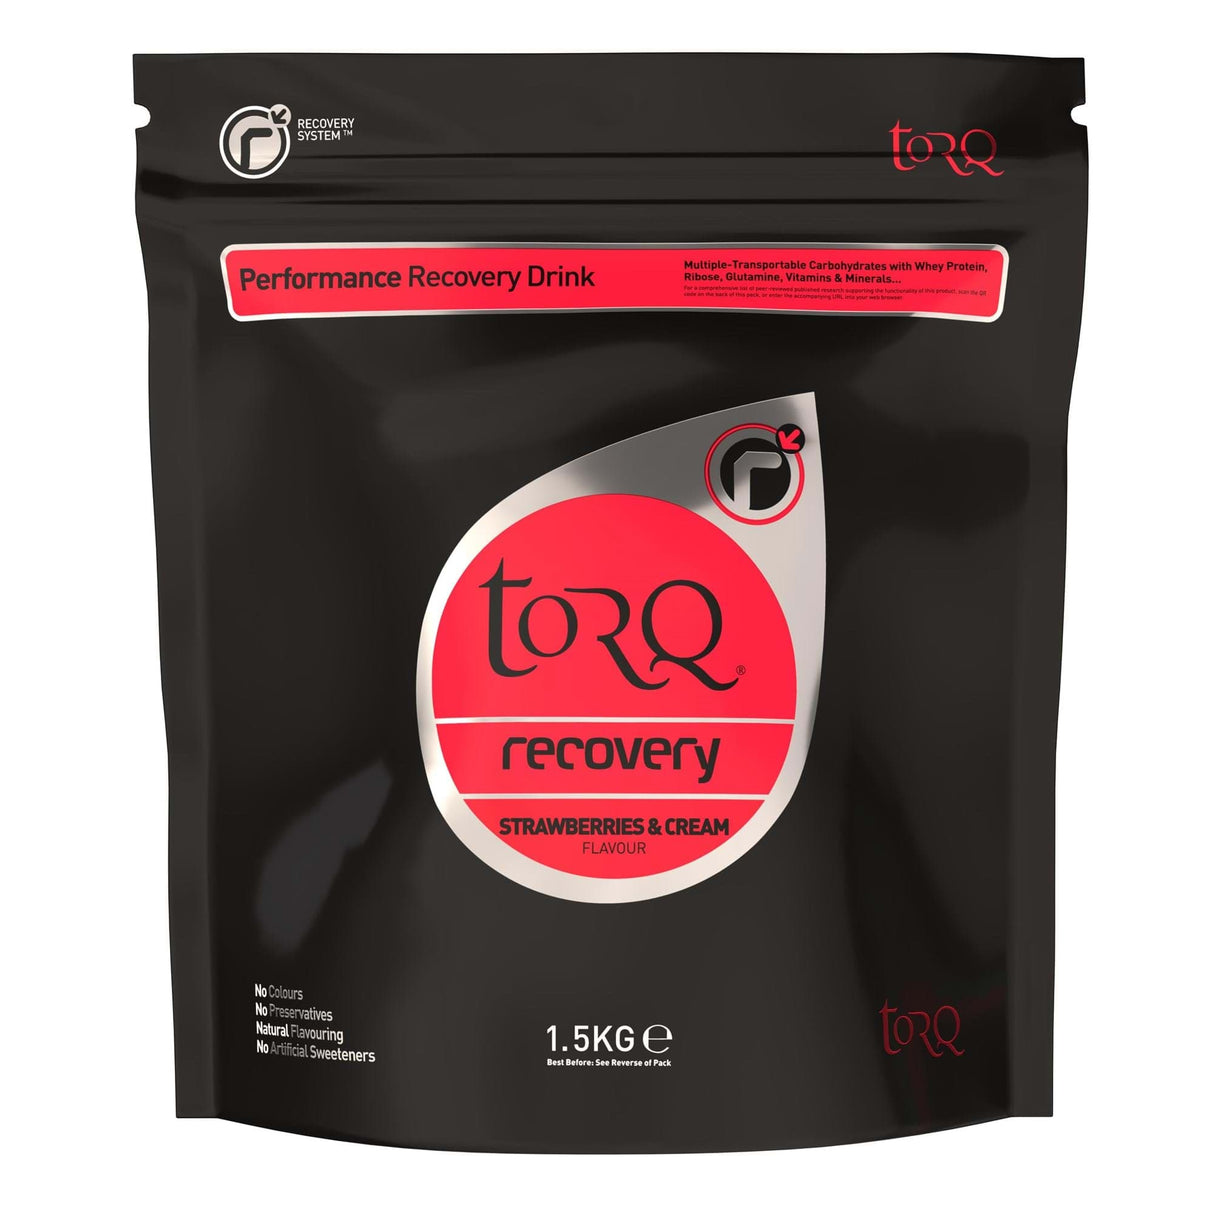 Torq Recovery Drink (1 X 1.5Kg): Strawberries & Cream